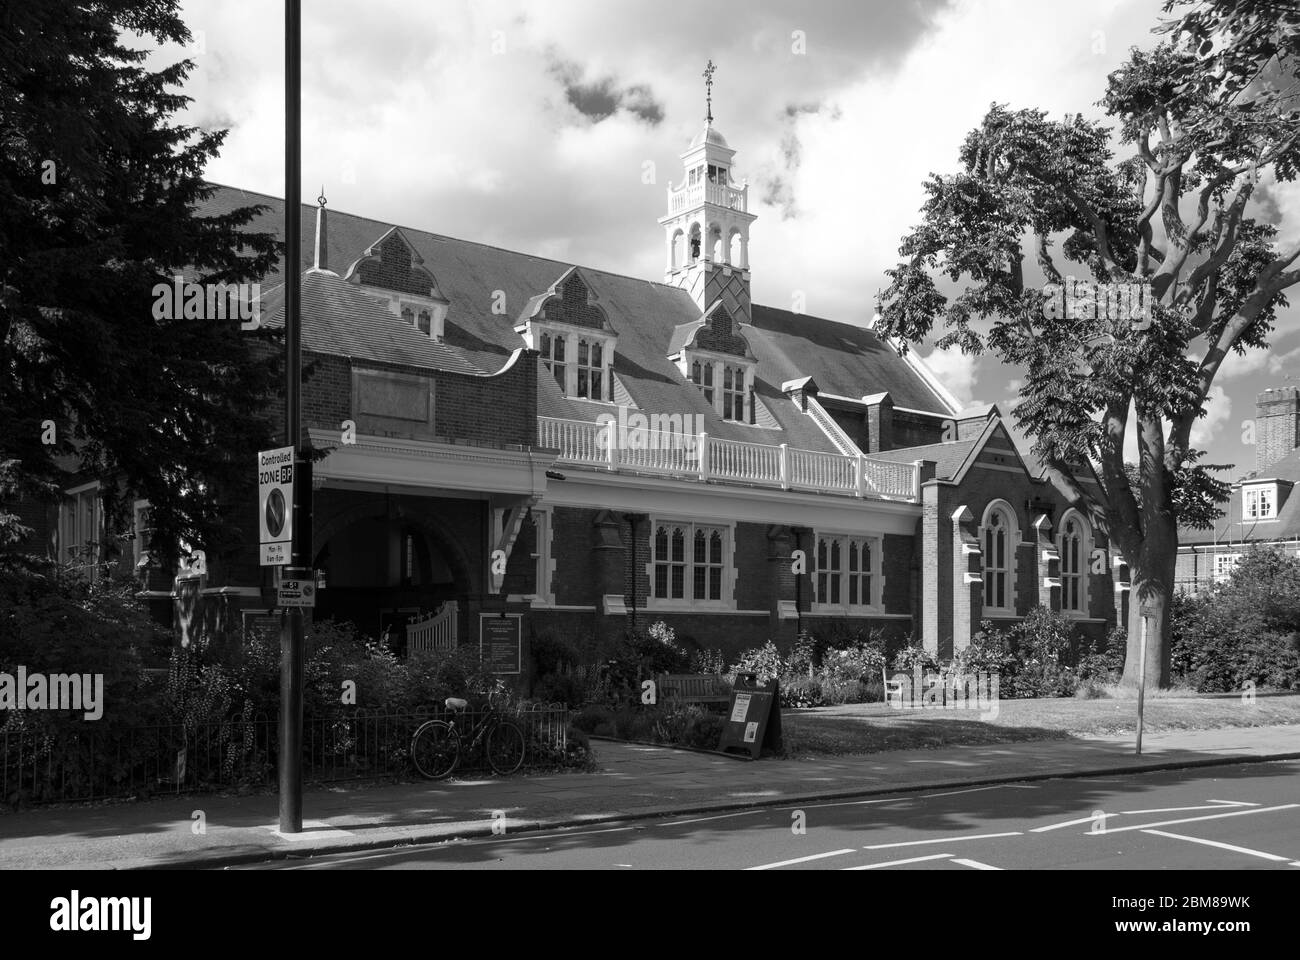 Queen Anne Revival Architecture Richard Norman Shaw Garden Suburb St. Michael & All Angels Church Woodstock Road Turnham Green Chiswick London W4 B&W Stock Photo